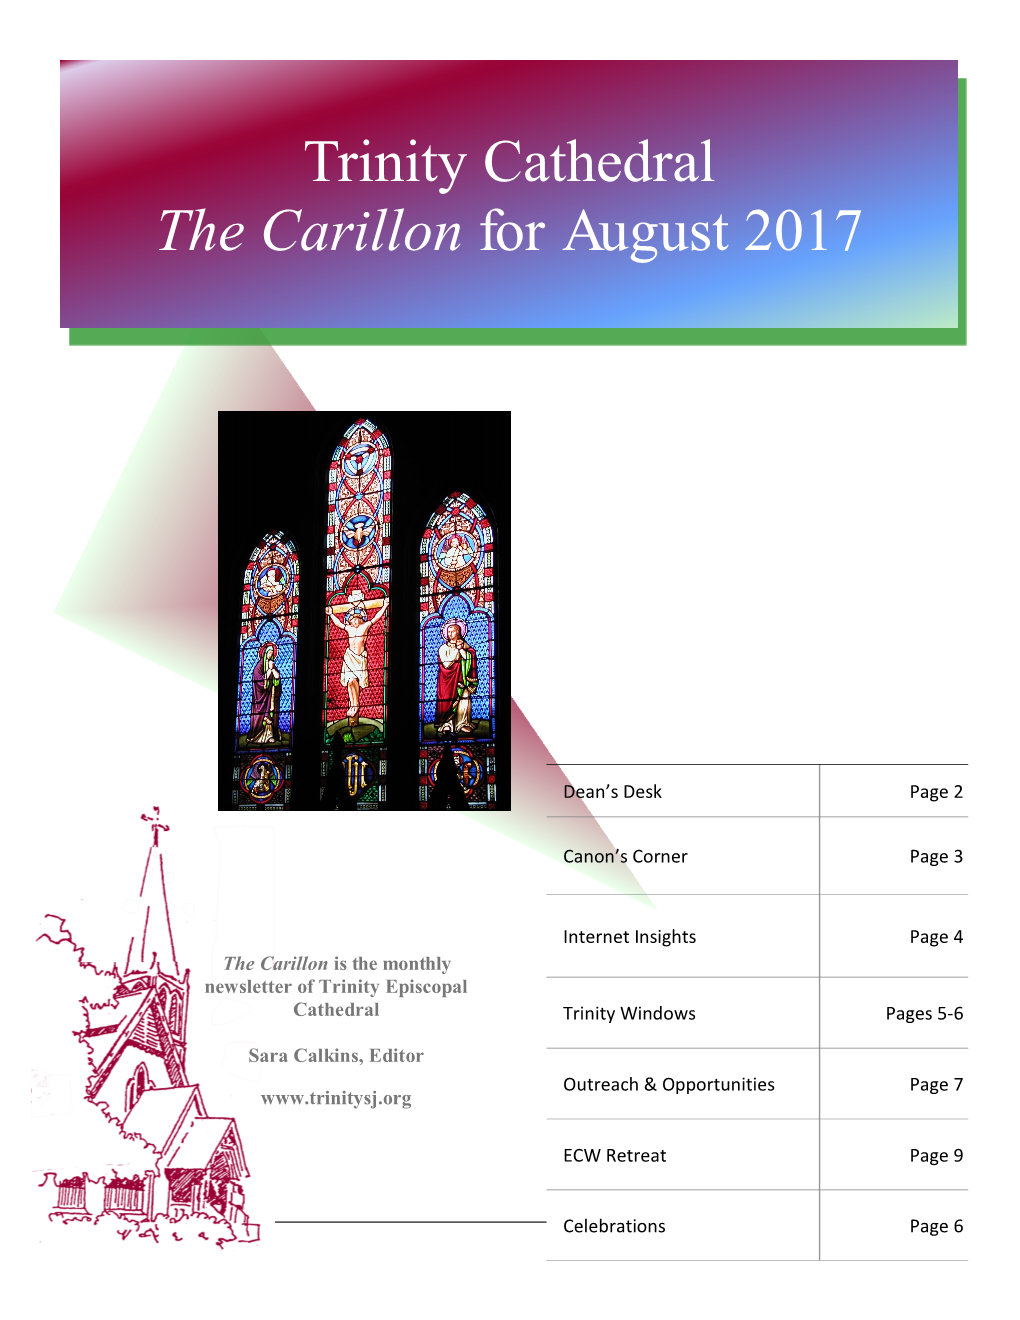 Trinity Cathedral the Carillon for August 2017